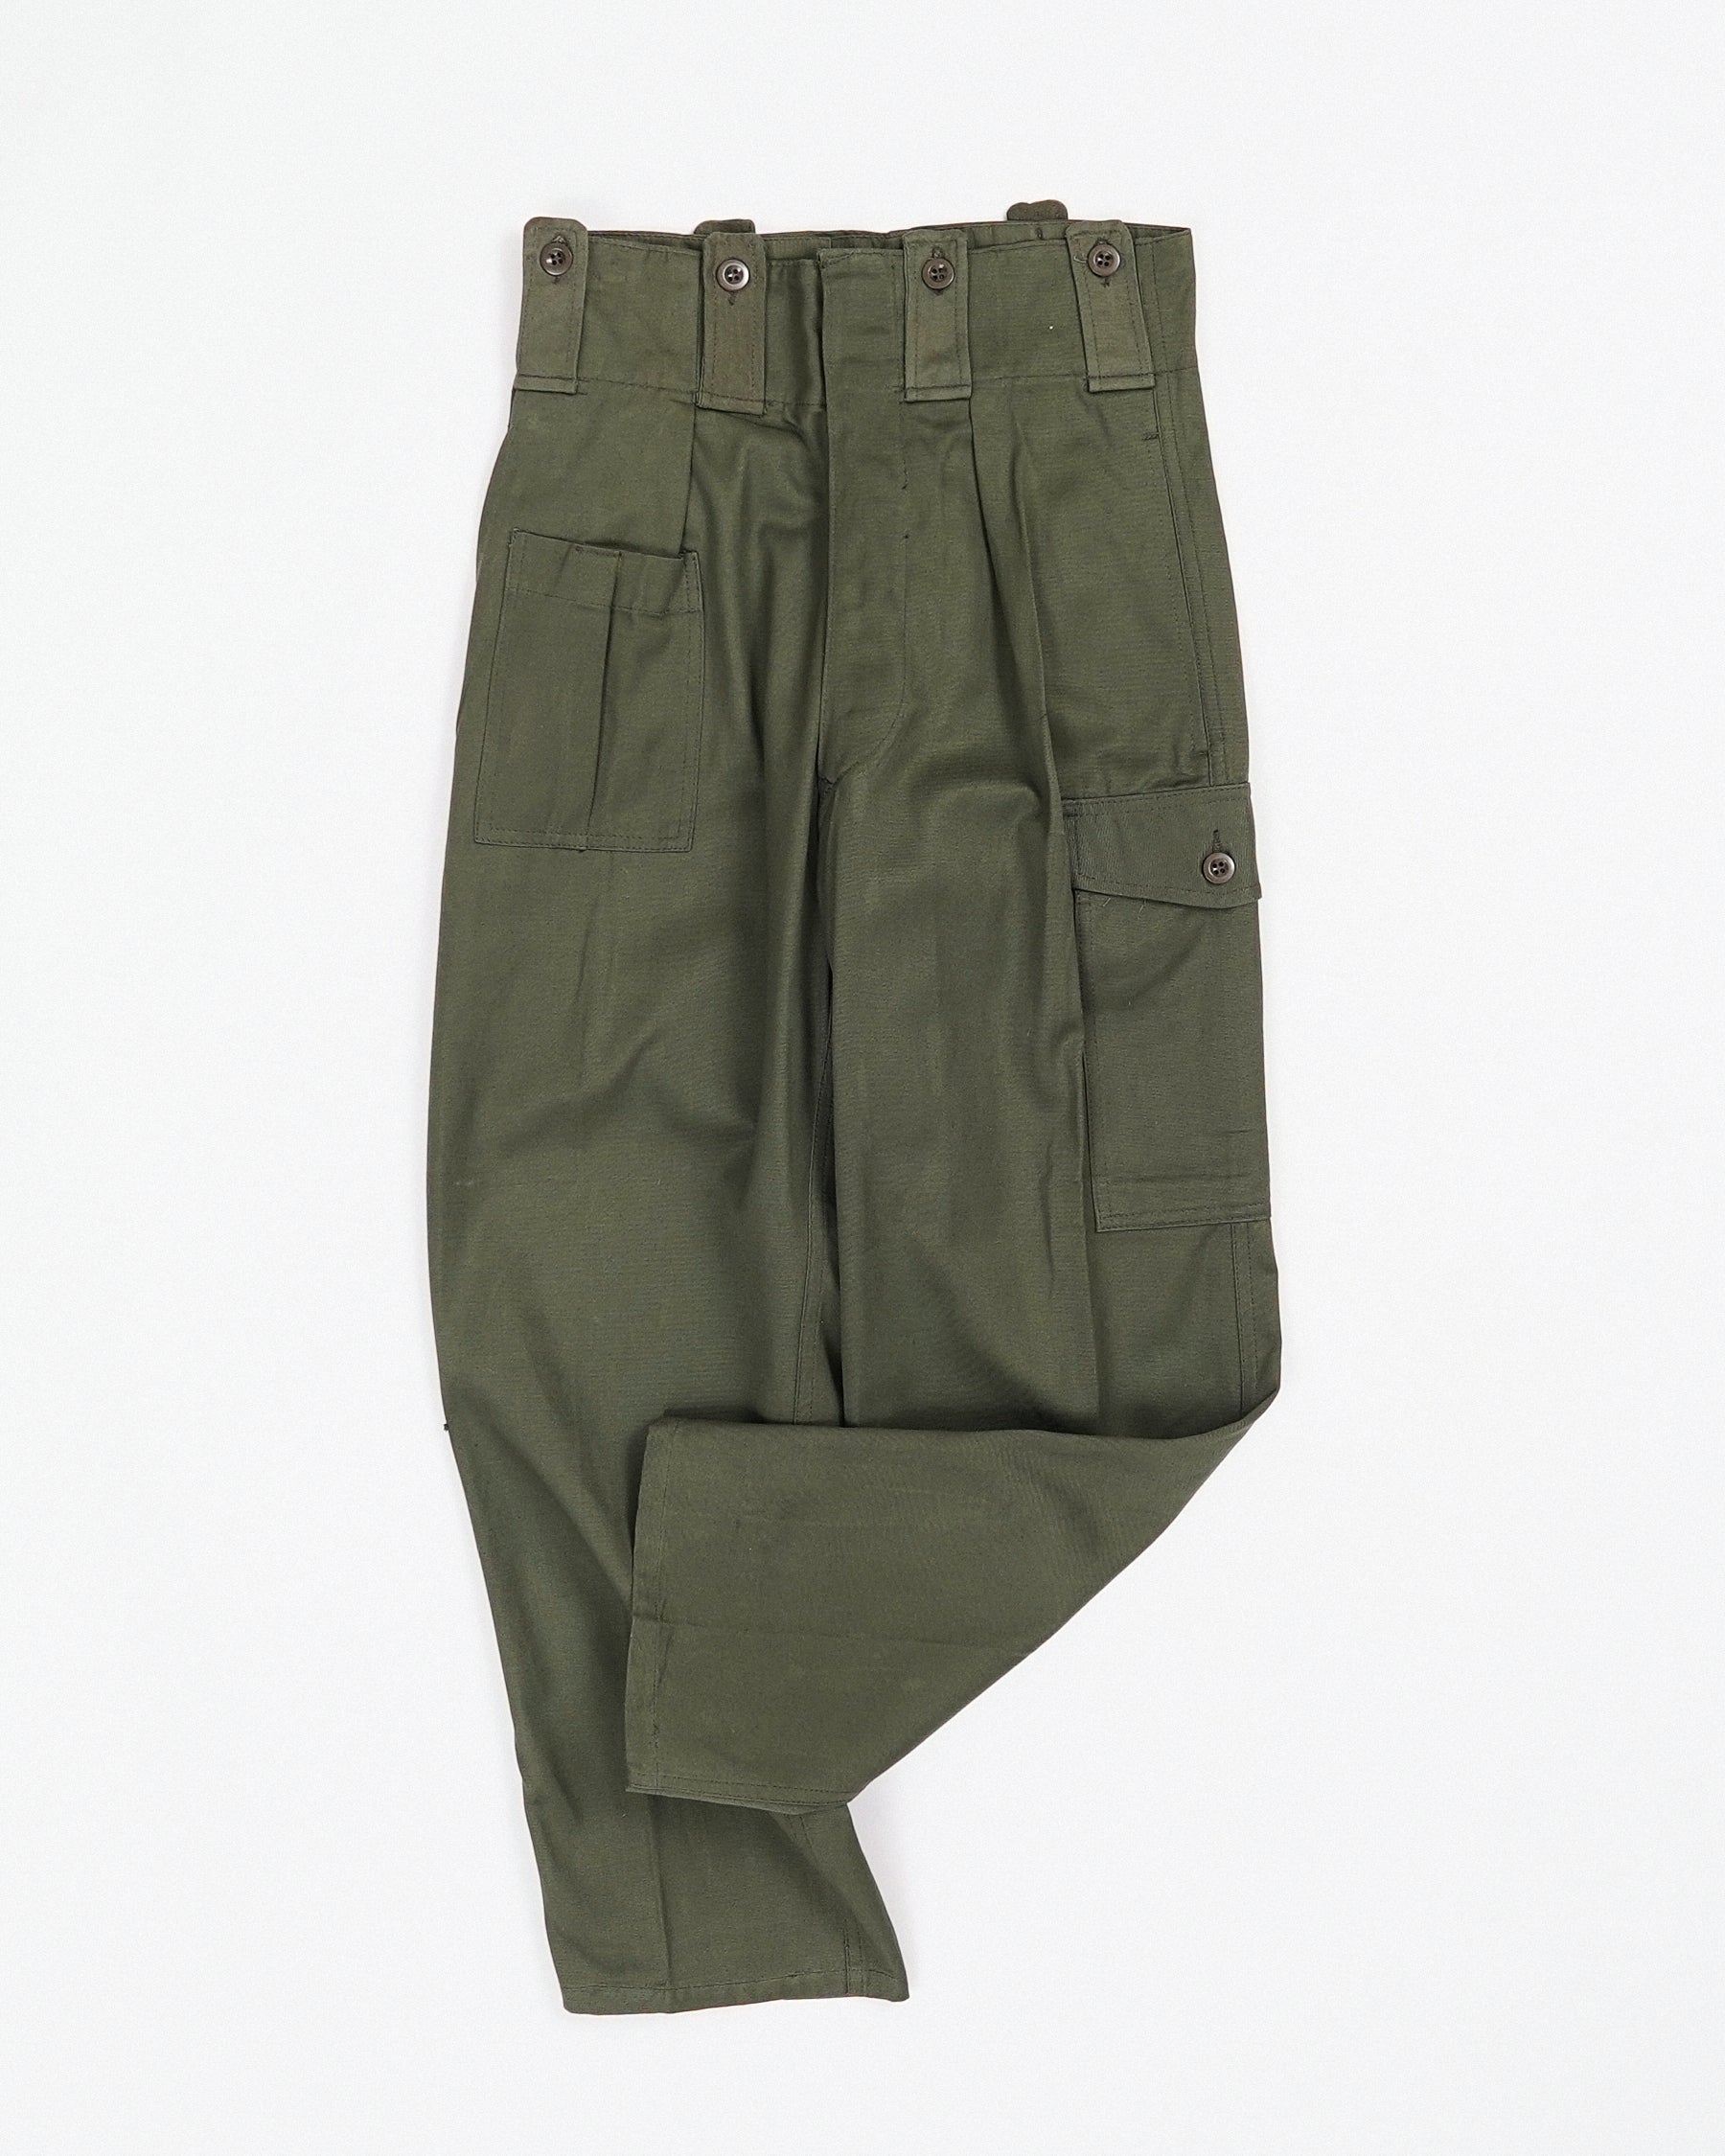 70s ARMY MILITARY TROUSERS 80/74